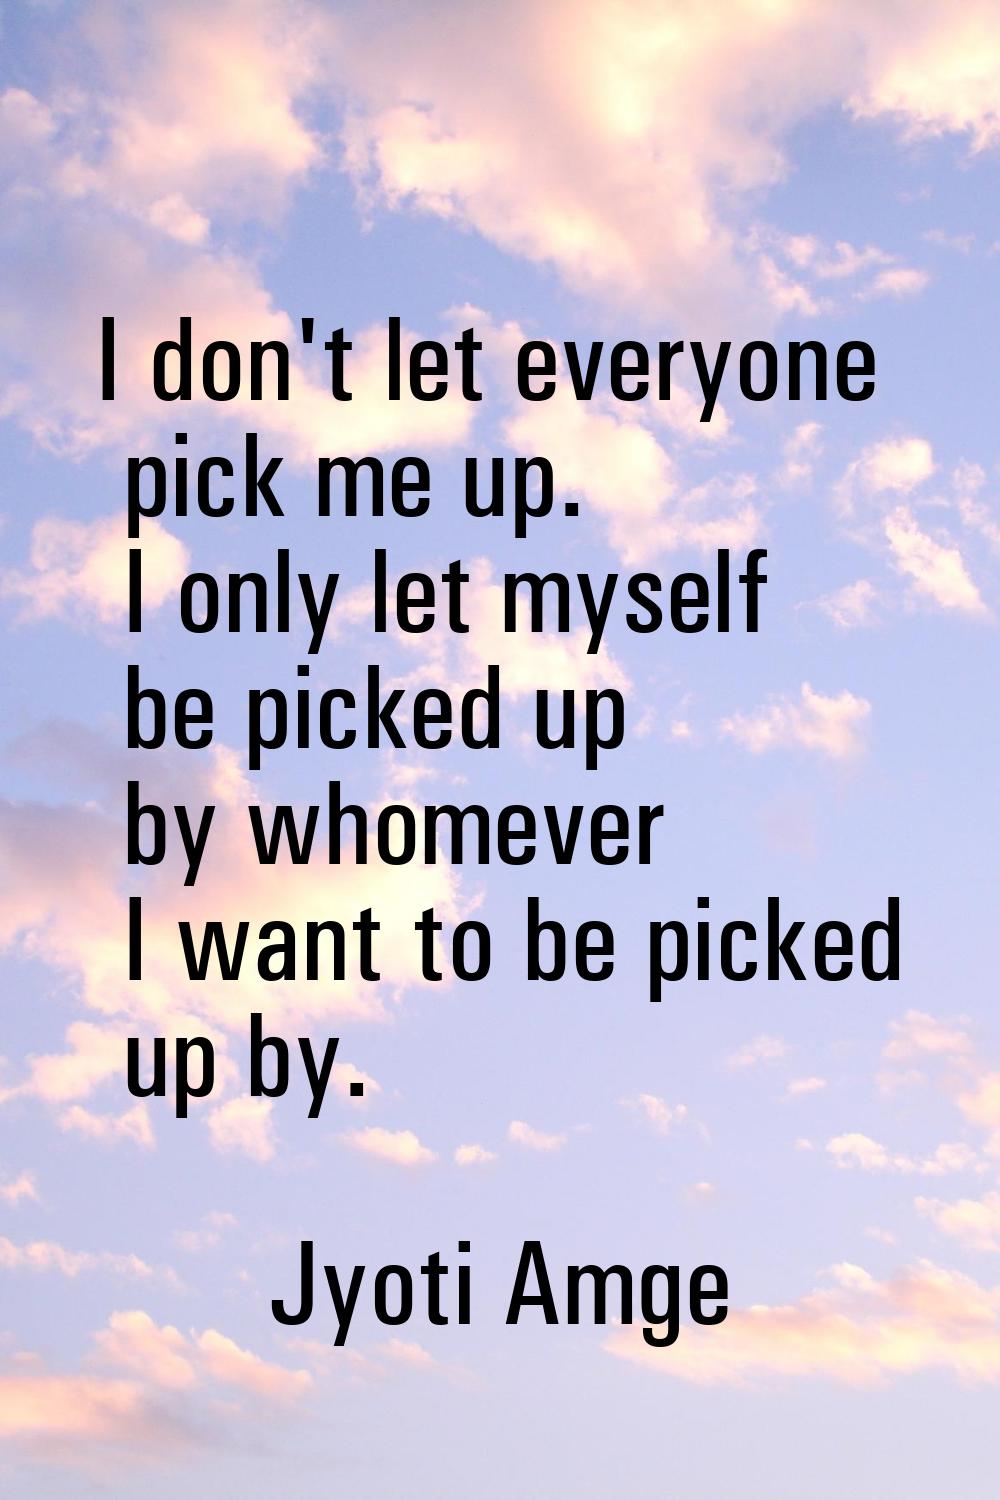 I don't let everyone pick me up. I only let myself be picked up by whomever I want to be picked up 